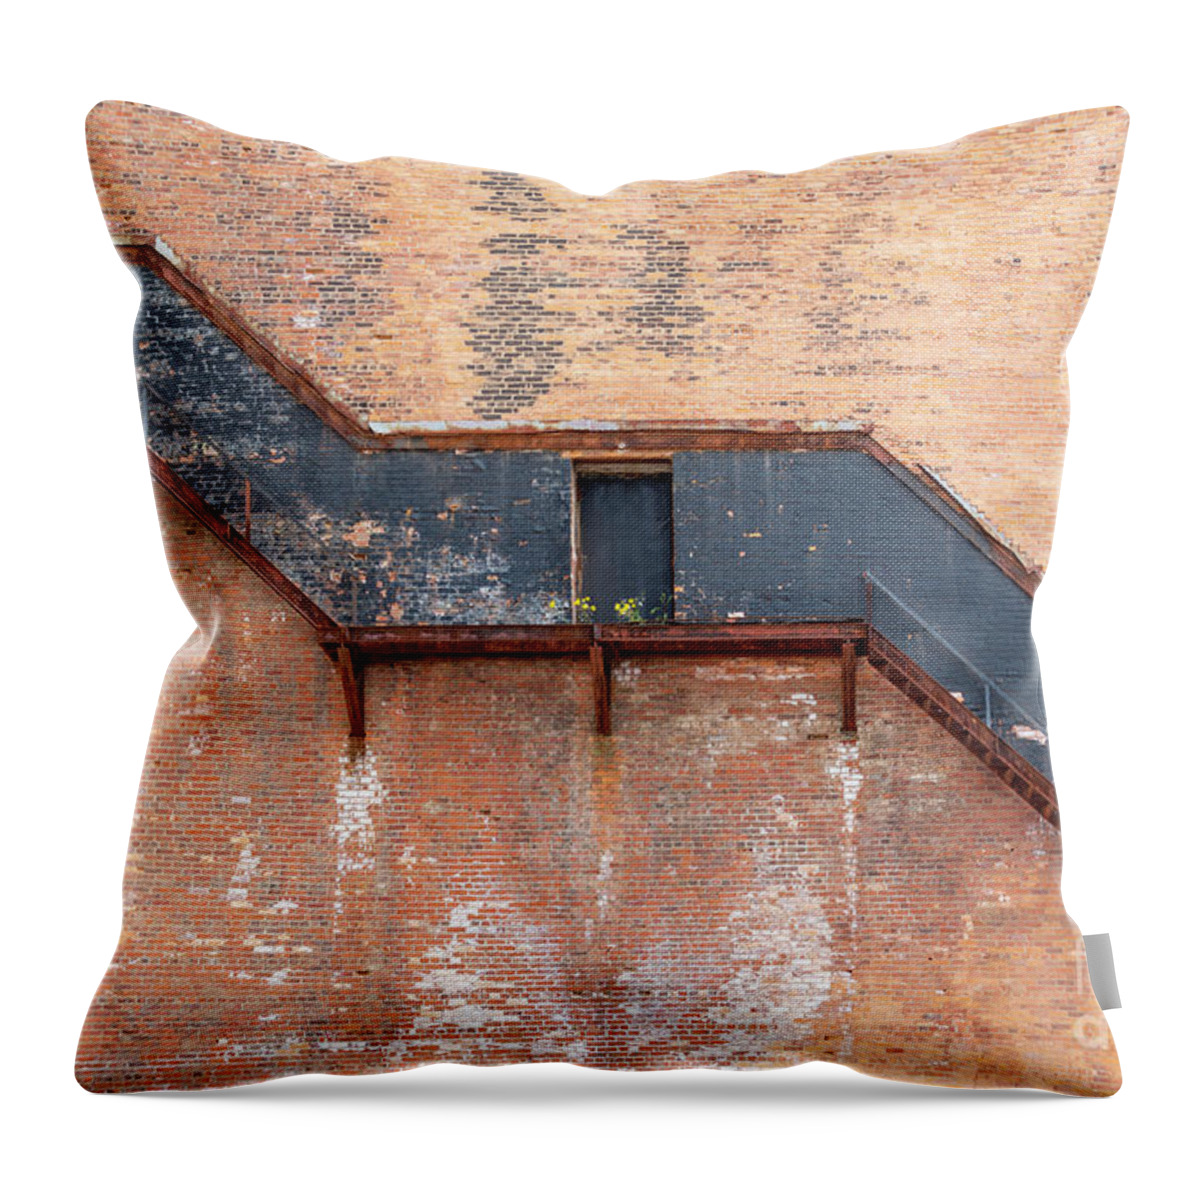 Fire Escape Throw Pillow featuring the photograph Fire Escape by Jim West